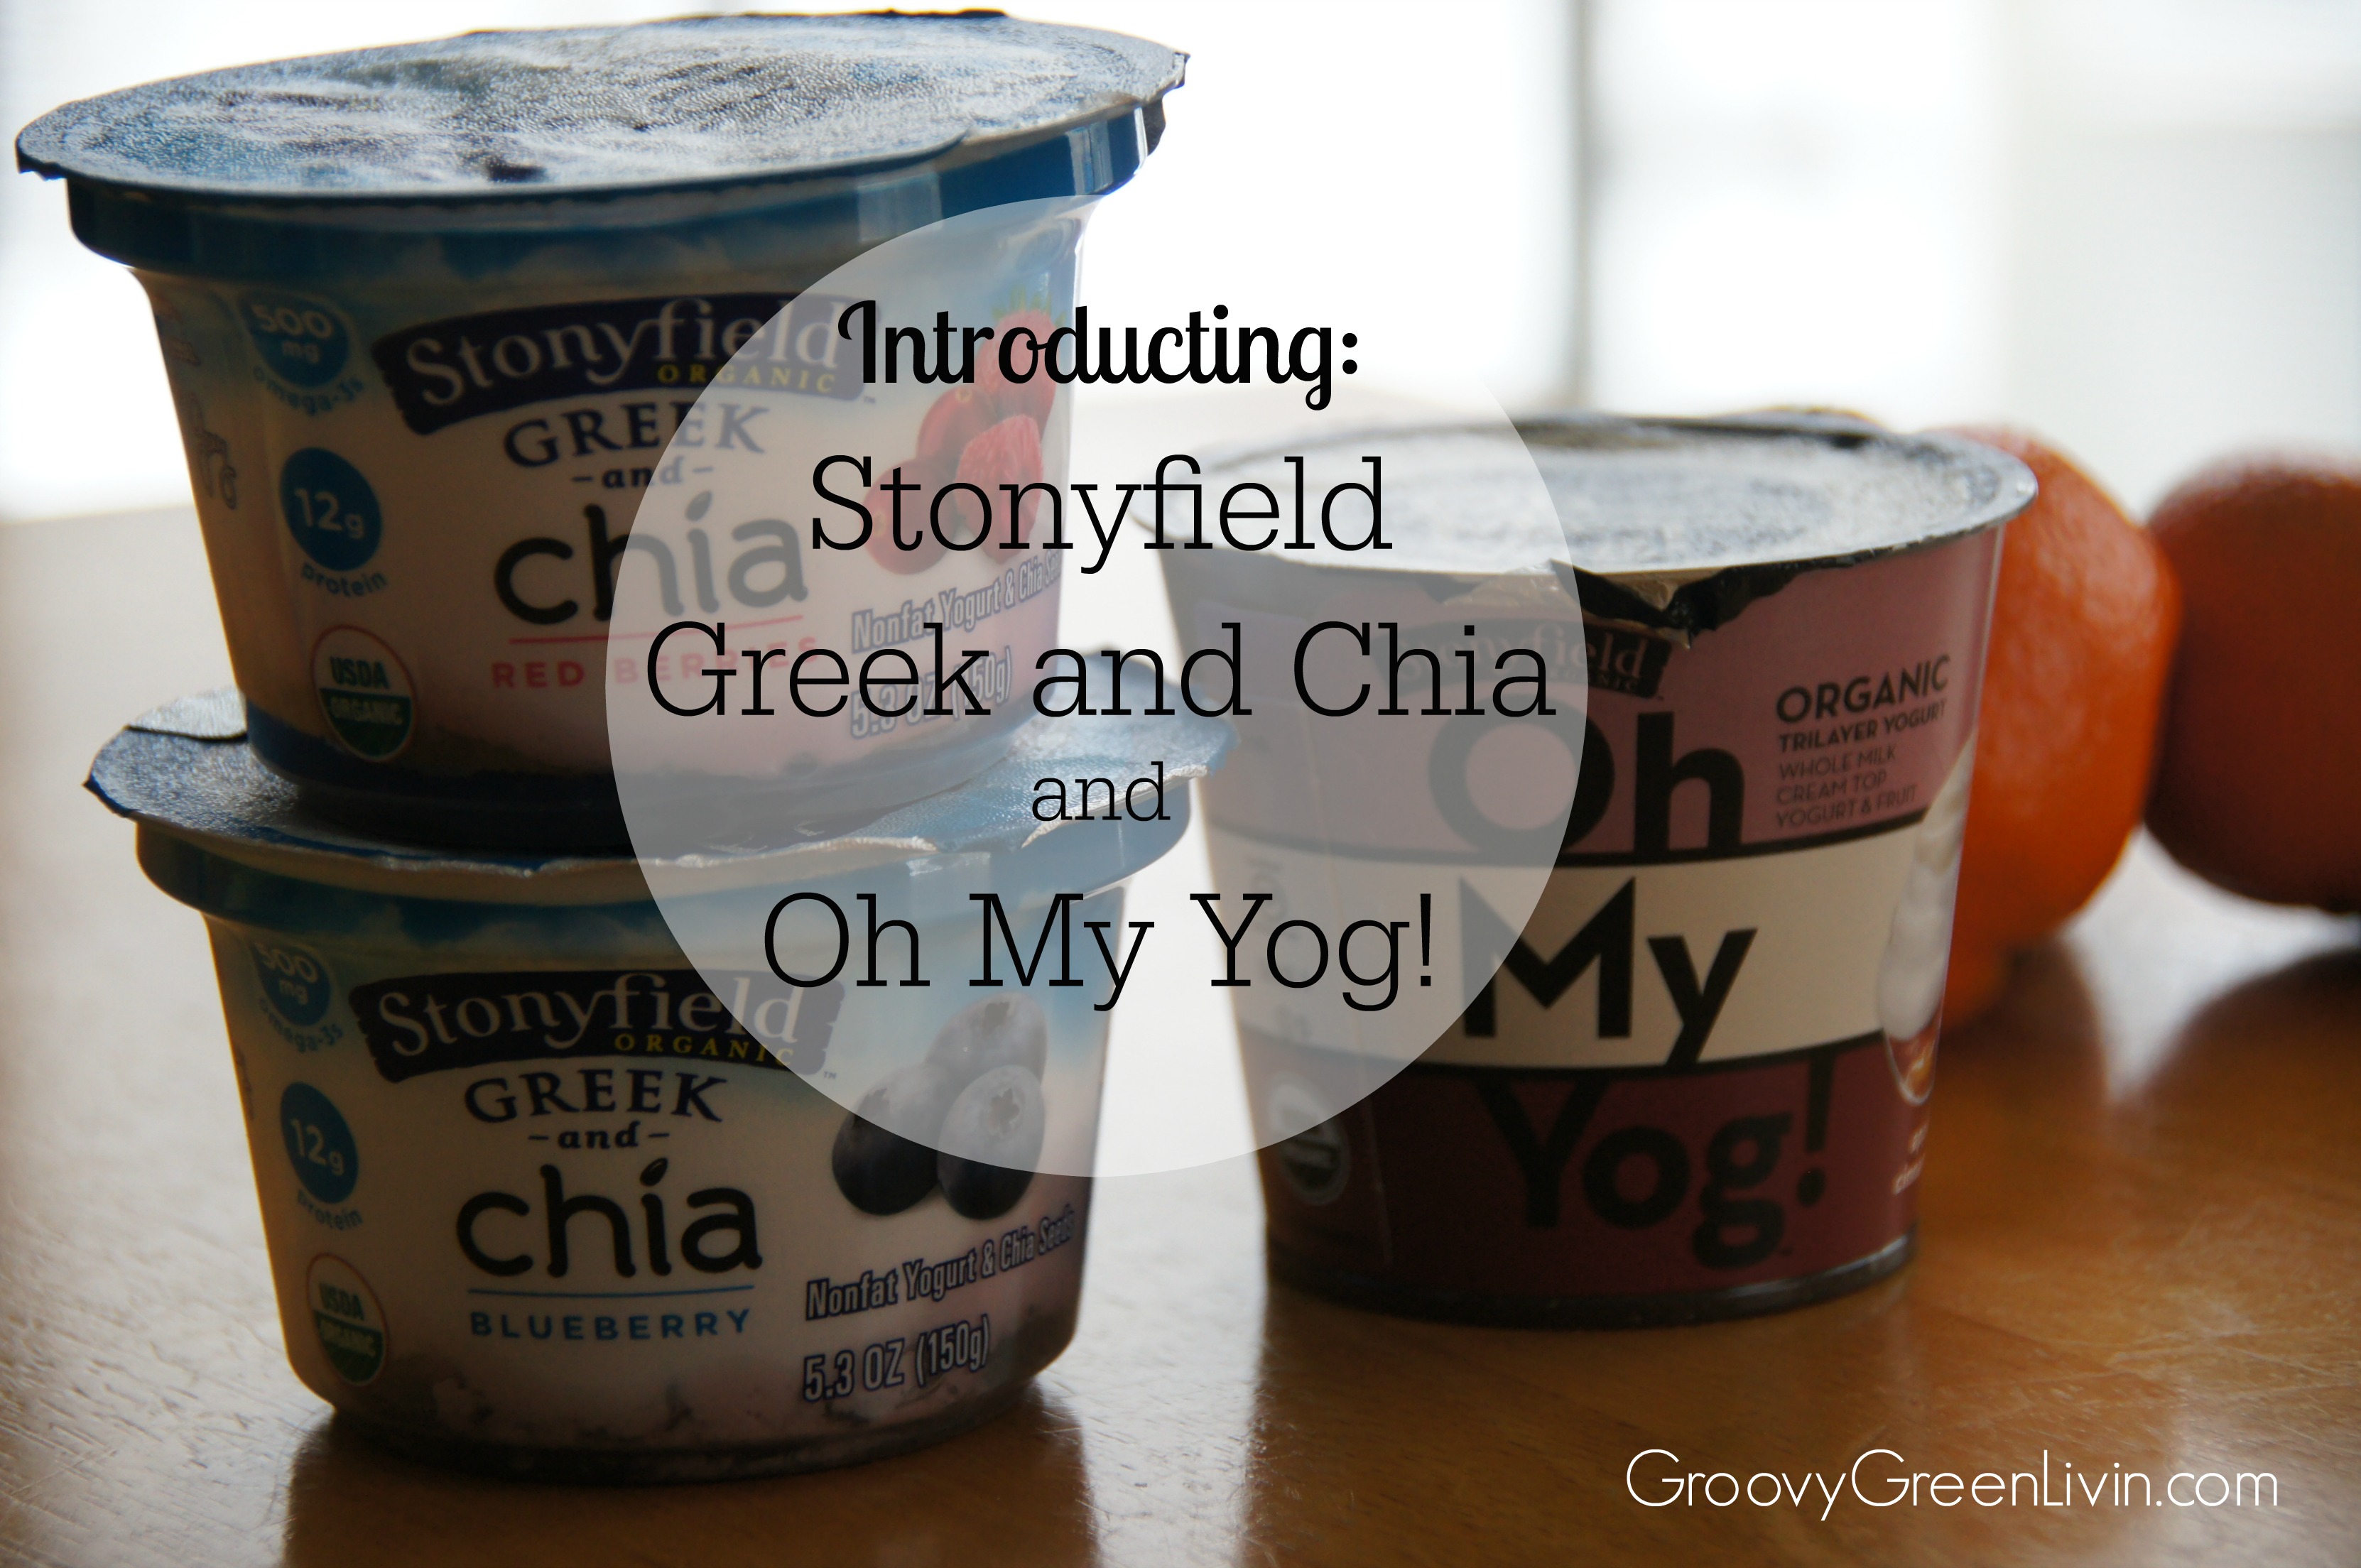 Stonyfield Greek and Chia and Oh My Yog! Groovy Green Livin